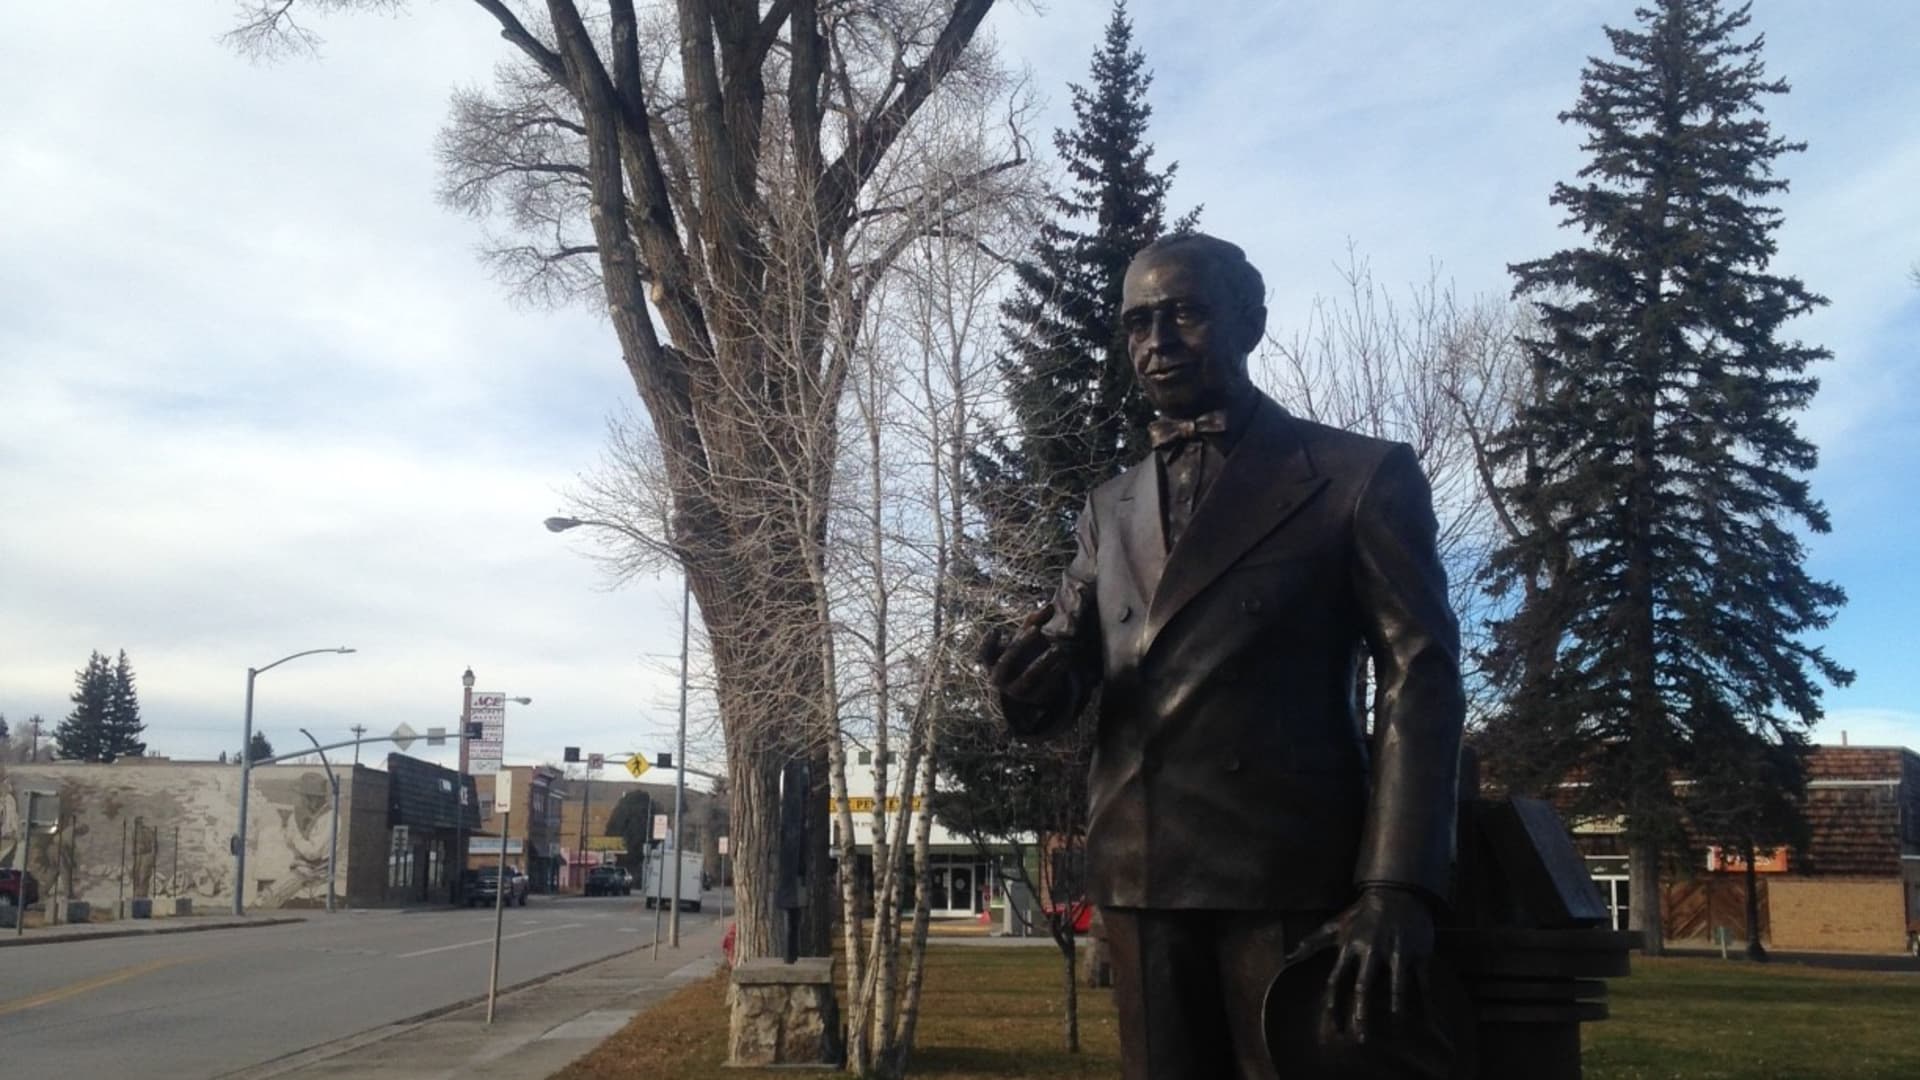 The town of Kemmerer, Wyoming. The statue is of J.C. Penney, as Kemmerer is home of the first Penney store, William Thek, the mayor of Kemmerer told CNBC.